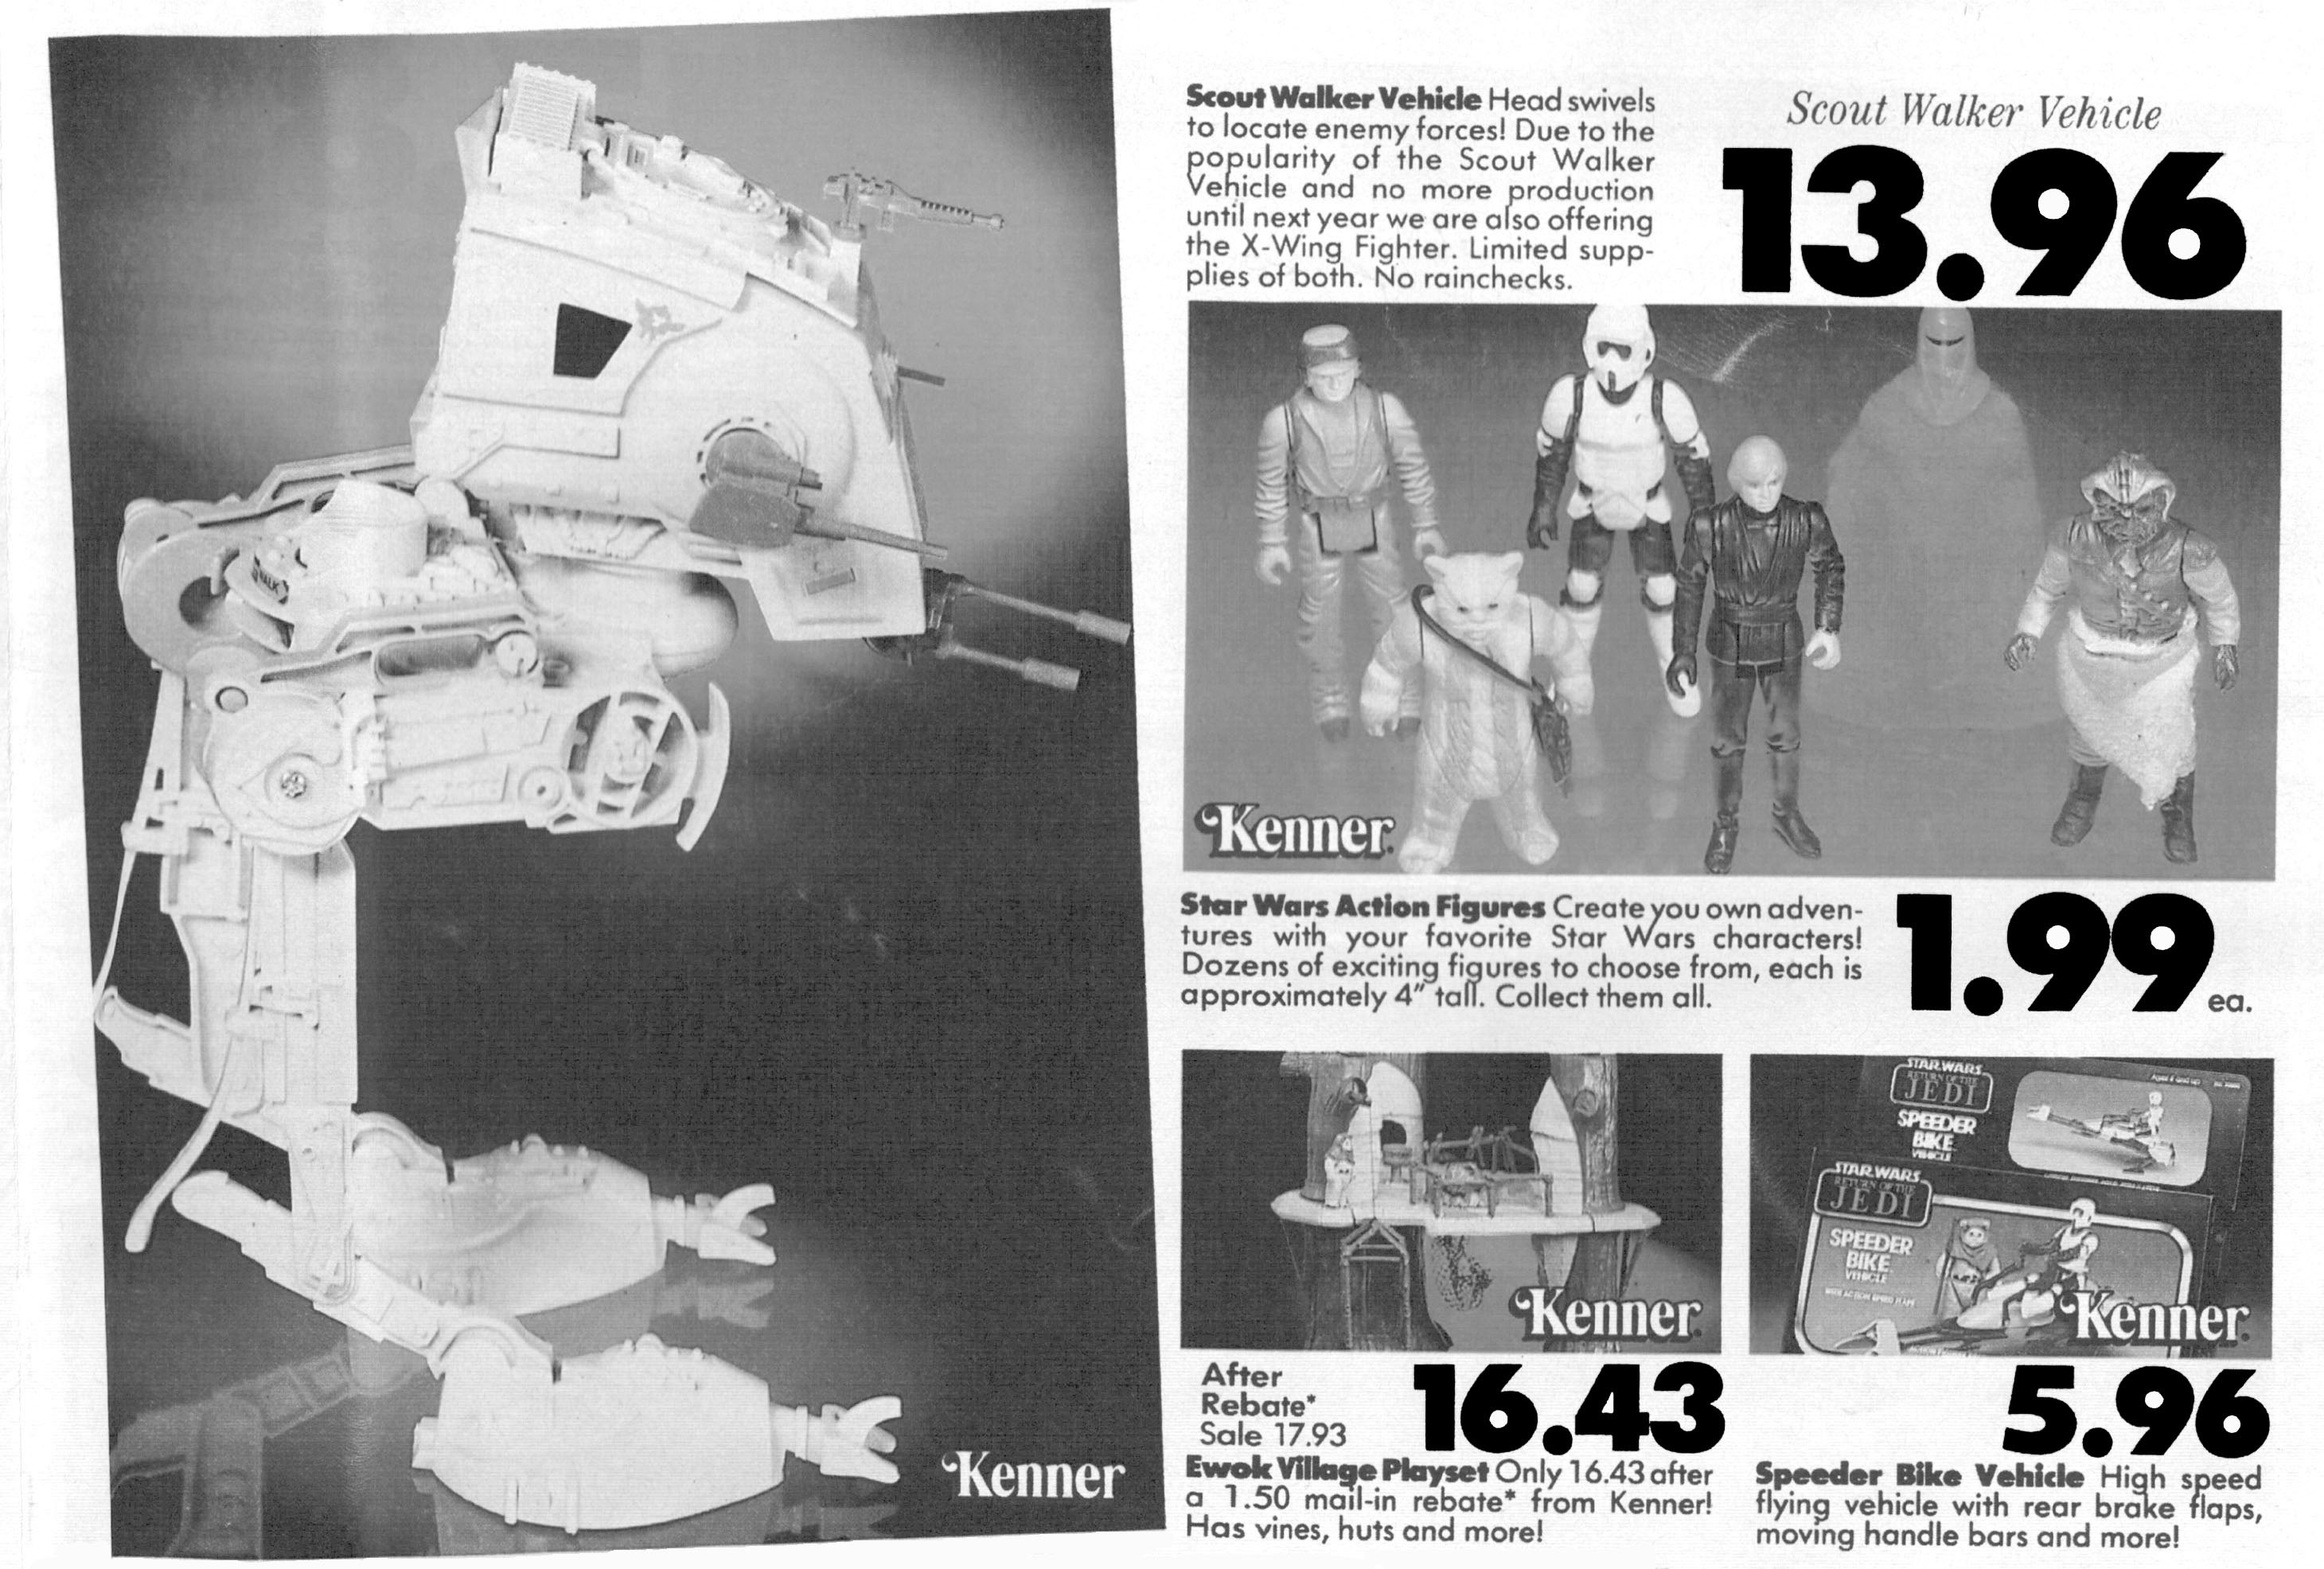 Some things never change. Some of the hottest toys for Christmas 1983 were Star Wars memorabilia. They included action figurines, an Ewok village replica, a speeder bike toy and a Scout walker vehicle with a swivel top. They are probably more valuable today. Original ad published December 2, 1983.